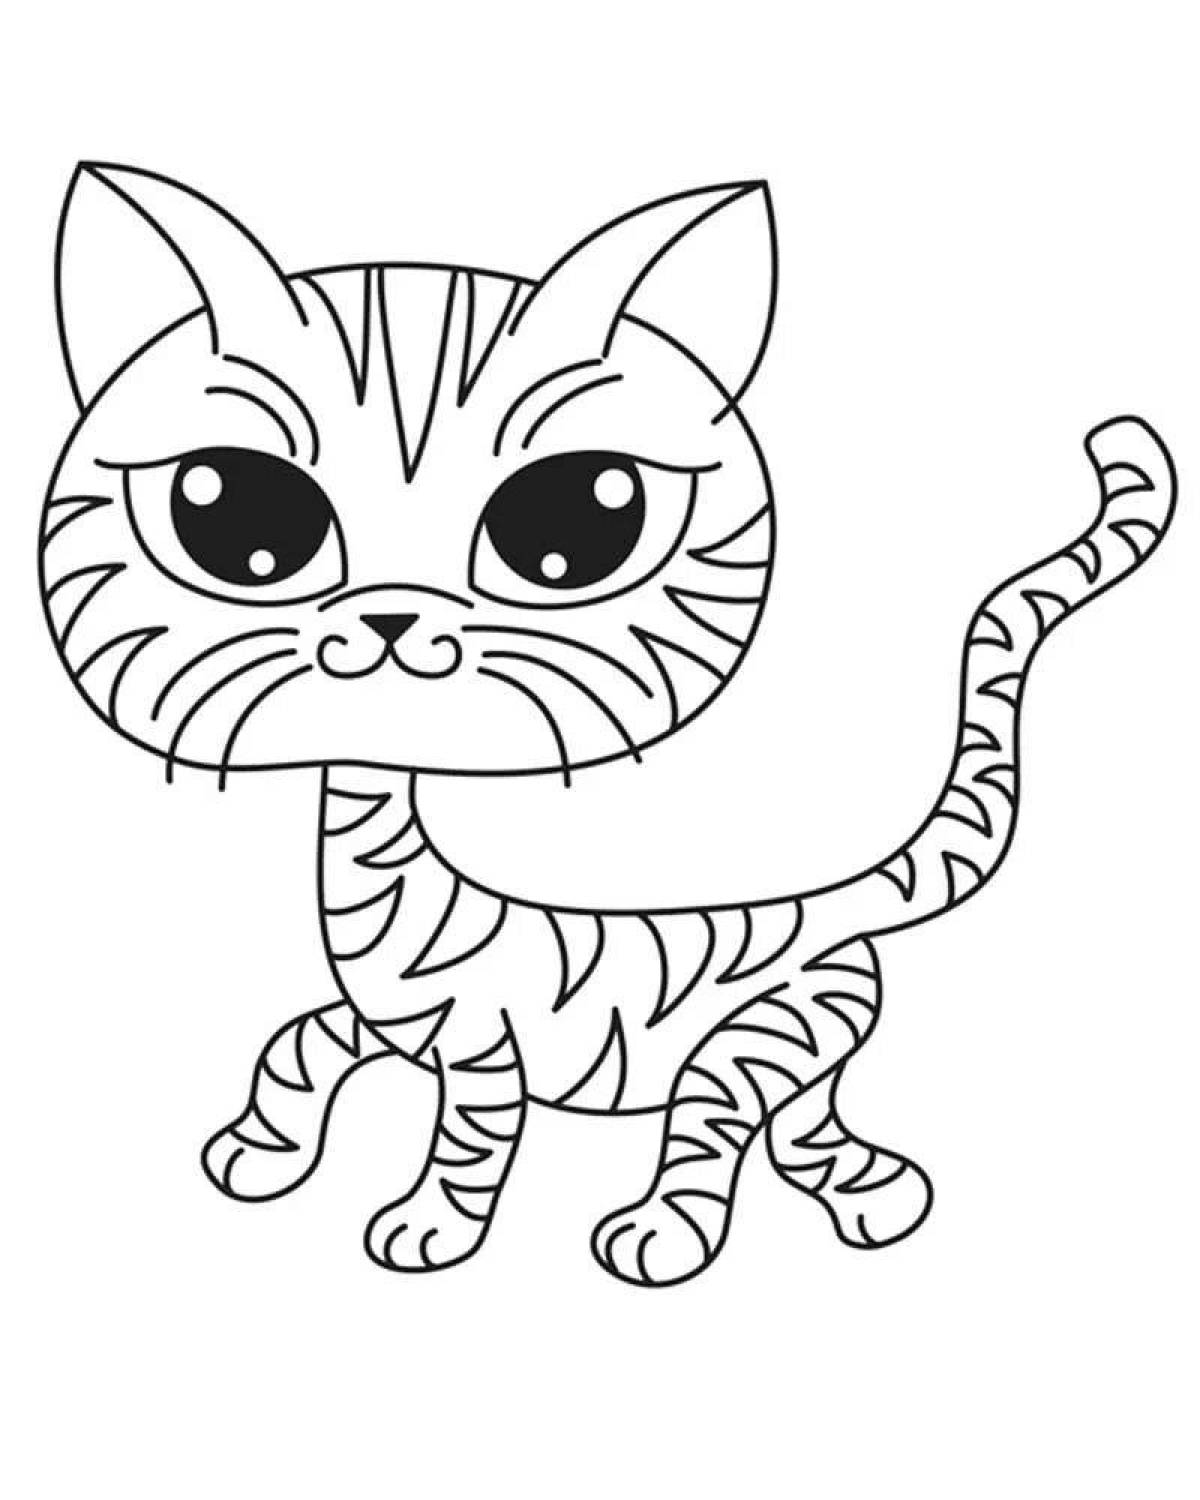 Outstanding kitty coloring book